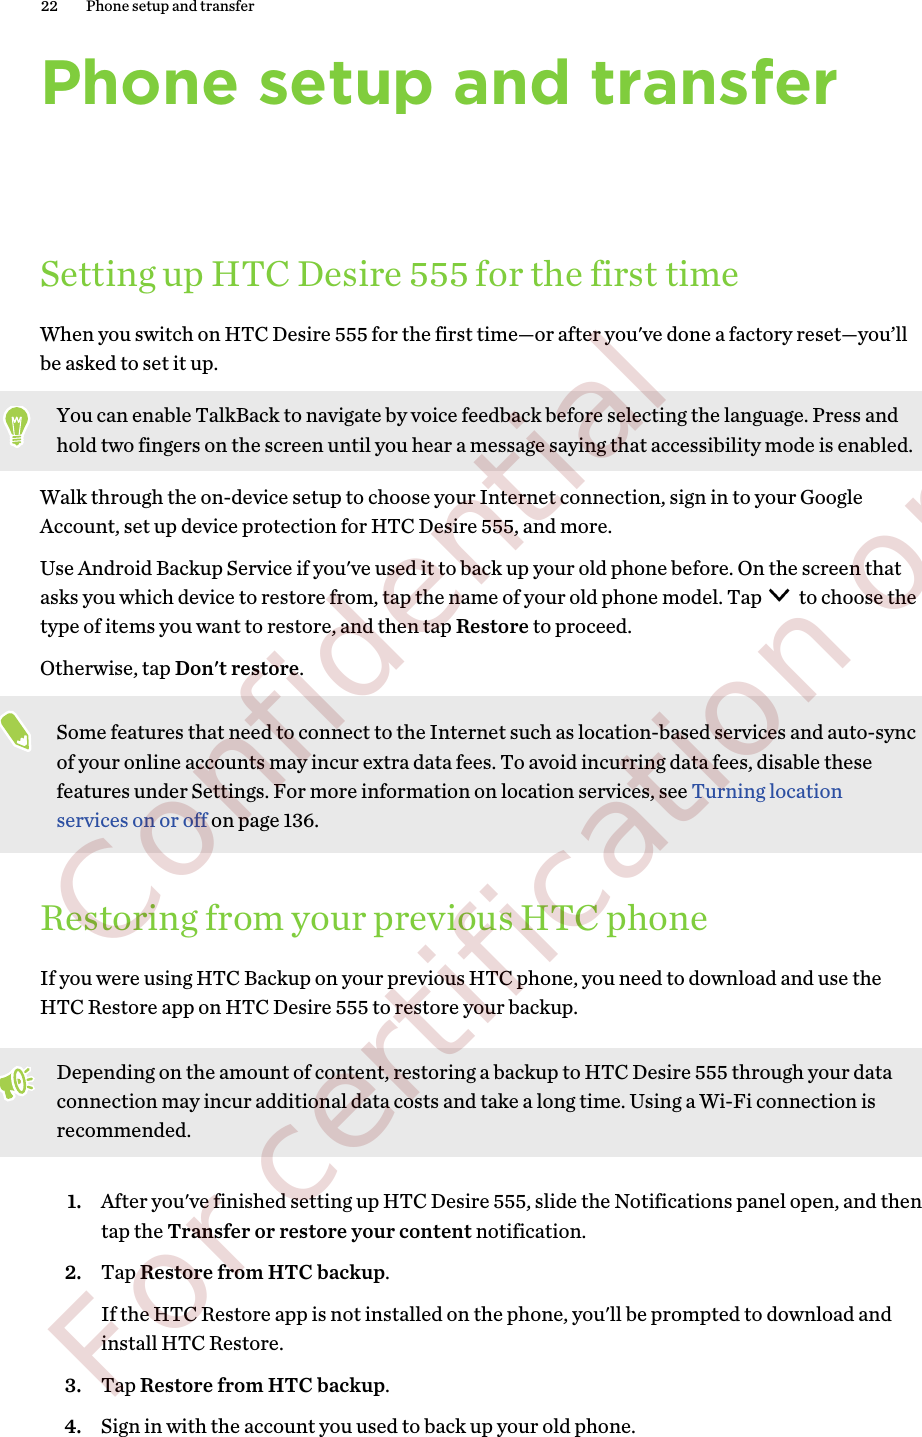 Phone setup and transferSetting up HTC Desire 555 for the first timeWhen you switch on HTC Desire 555 for the first time—or after you&apos;ve done a factory reset—you’llbe asked to set it up.You can enable TalkBack to navigate by voice feedback before selecting the language. Press andhold two fingers on the screen until you hear a message saying that accessibility mode is enabled.Walk through the on-device setup to choose your Internet connection, sign in to your GoogleAccount, set up device protection for HTC Desire 555, and more.Use Android Backup Service if you&apos;ve used it to back up your old phone before. On the screen thatasks you which device to restore from, tap the name of your old phone model. Tap   to choose thetype of items you want to restore, and then tap Restore to proceed. Otherwise, tap Don&apos;t restore.Some features that need to connect to the Internet such as location-based services and auto-syncof your online accounts may incur extra data fees. To avoid incurring data fees, disable thesefeatures under Settings. For more information on location services, see Turning locationservices on or off on page 136.Restoring from your previous HTC phoneIf you were using HTC Backup on your previous HTC phone, you need to download and use theHTC Restore app on HTC Desire 555 to restore your backup.Depending on the amount of content, restoring a backup to HTC Desire 555 through your dataconnection may incur additional data costs and take a long time. Using a Wi-Fi connection isrecommended.1. After you&apos;ve finished setting up HTC Desire 555, slide the Notifications panel open, and thentap the Transfer or restore your content notification.2. Tap Restore from HTC backup.If the HTC Restore app is not installed on the phone, you&apos;ll be prompted to download andinstall HTC Restore.3. Tap Restore from HTC backup.4. Sign in with the account you used to back up your old phone.22 Phone setup and transfer        Confidential  For certification only